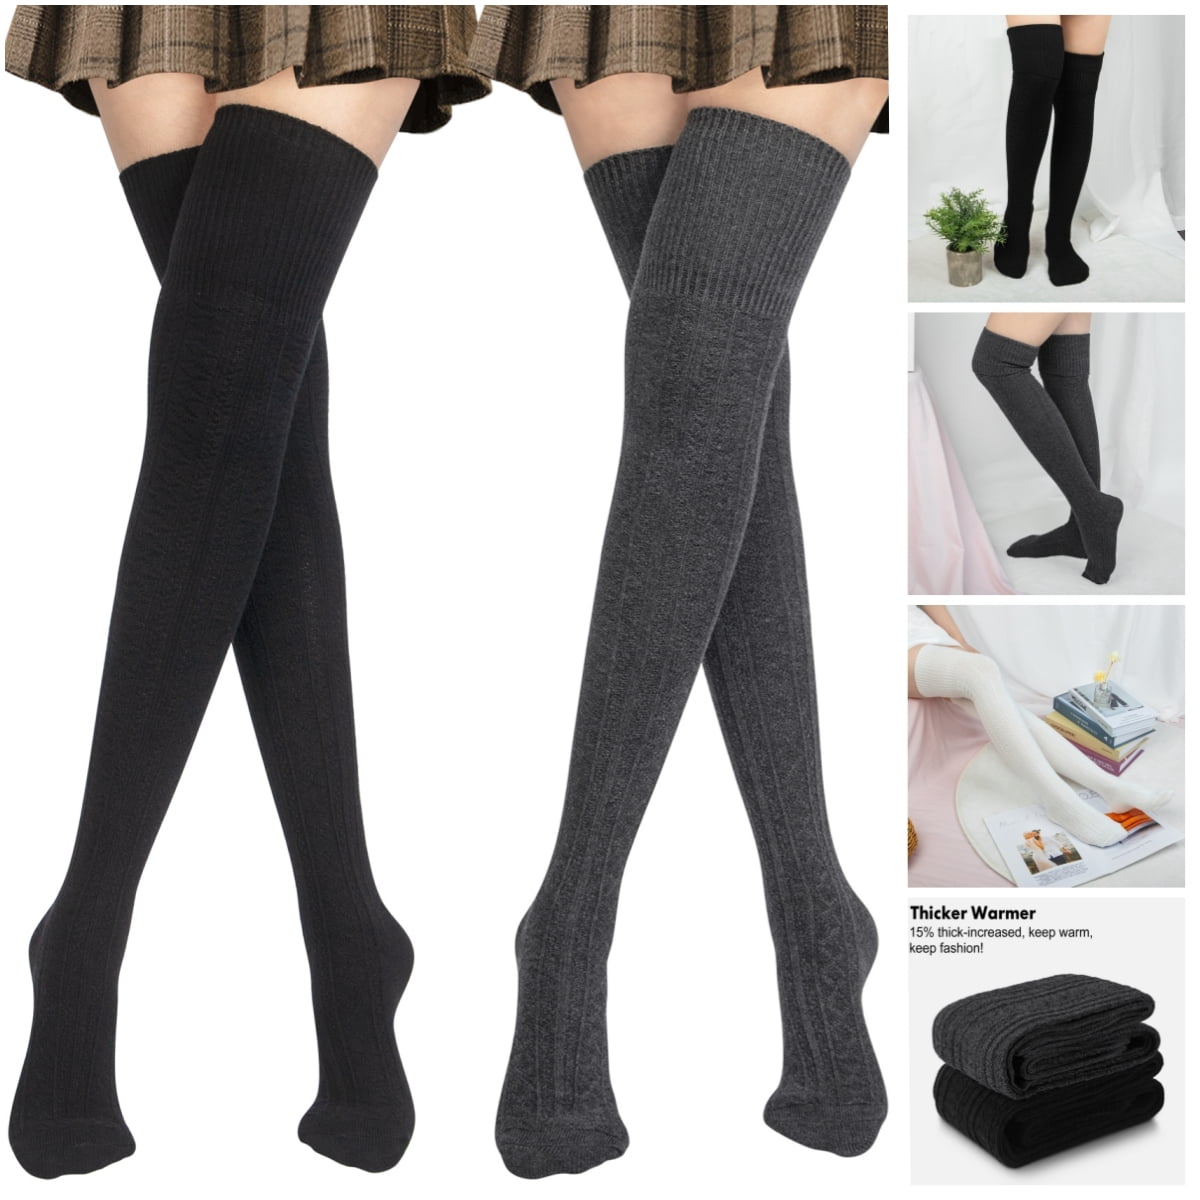 Loritta Thick Thigh High Socks for Women Extra Long Cotton Knit Warm Tall  Long Boot Stockings Leg Warmers Size 6-9, 2 Pairs 